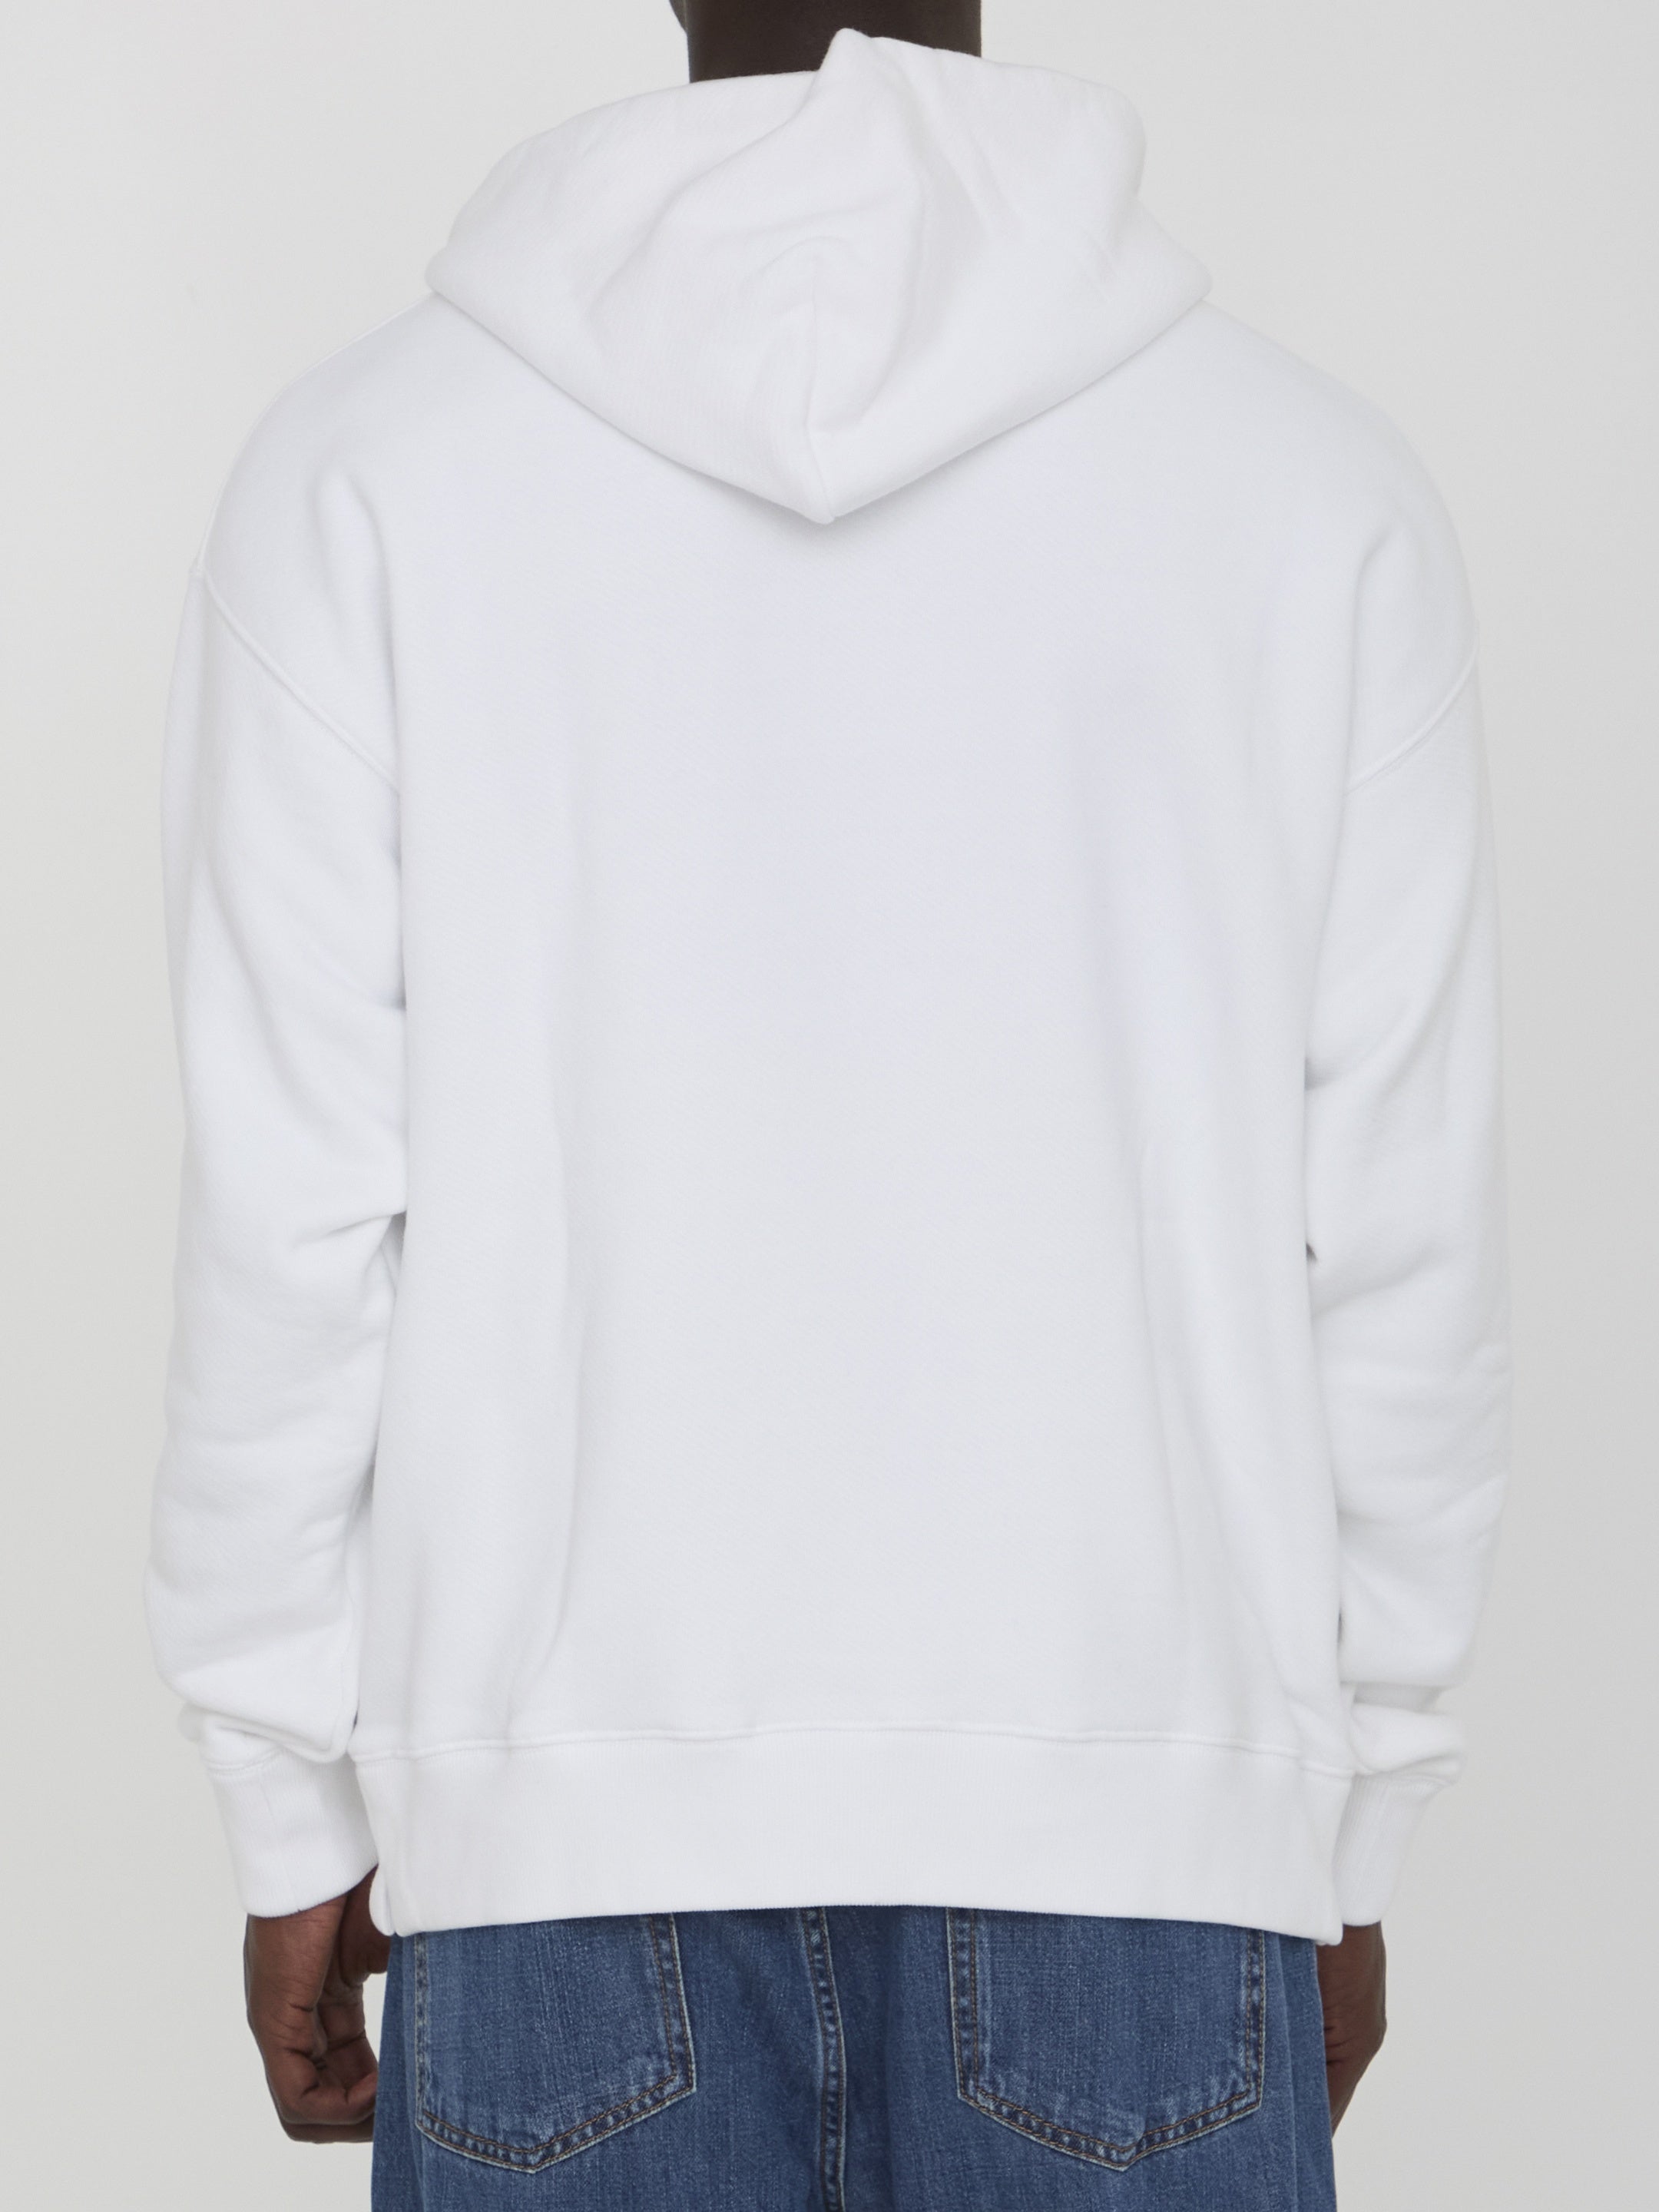 OFF-WHITE-OUTLET-SALE-Big-Bookish-Skate-hoodie-Strick-ARCHIVE-COLLECTION-4.jpg